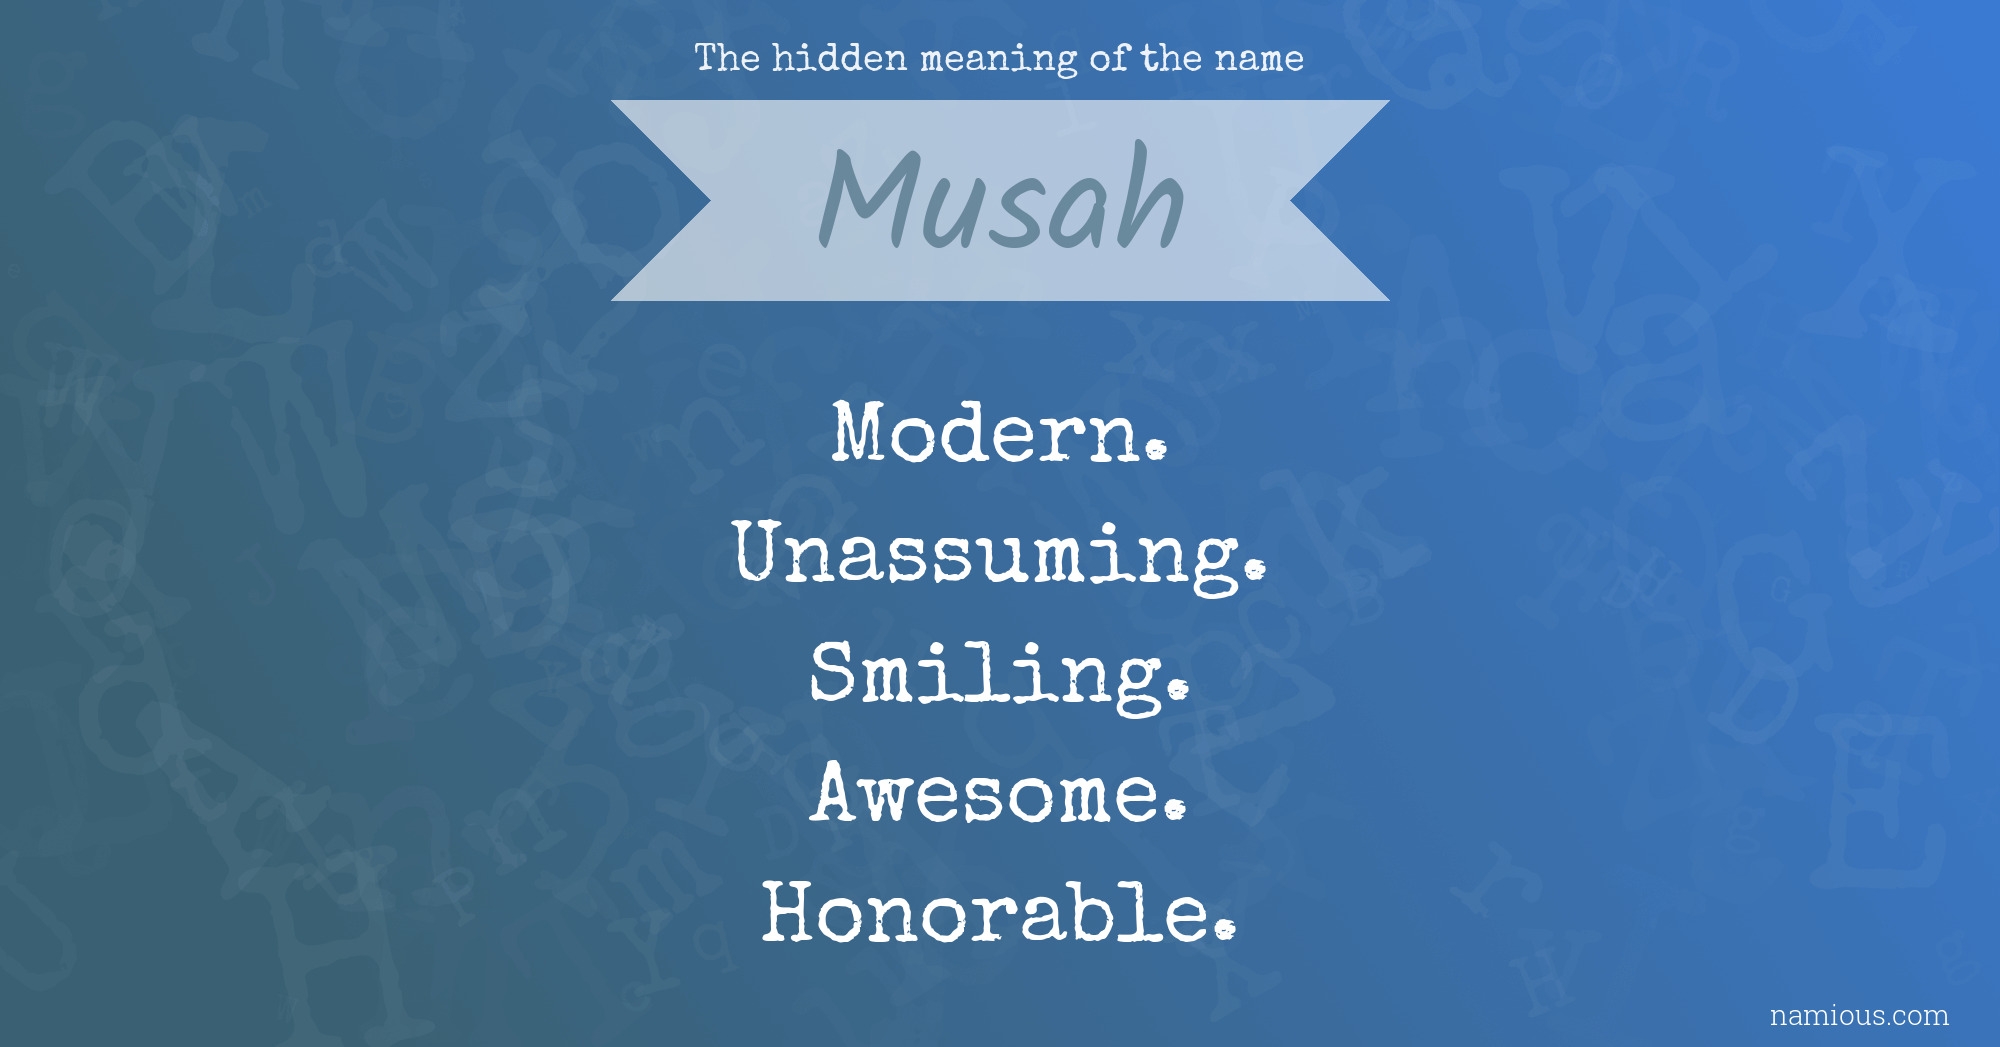 The hidden meaning of the name Musah